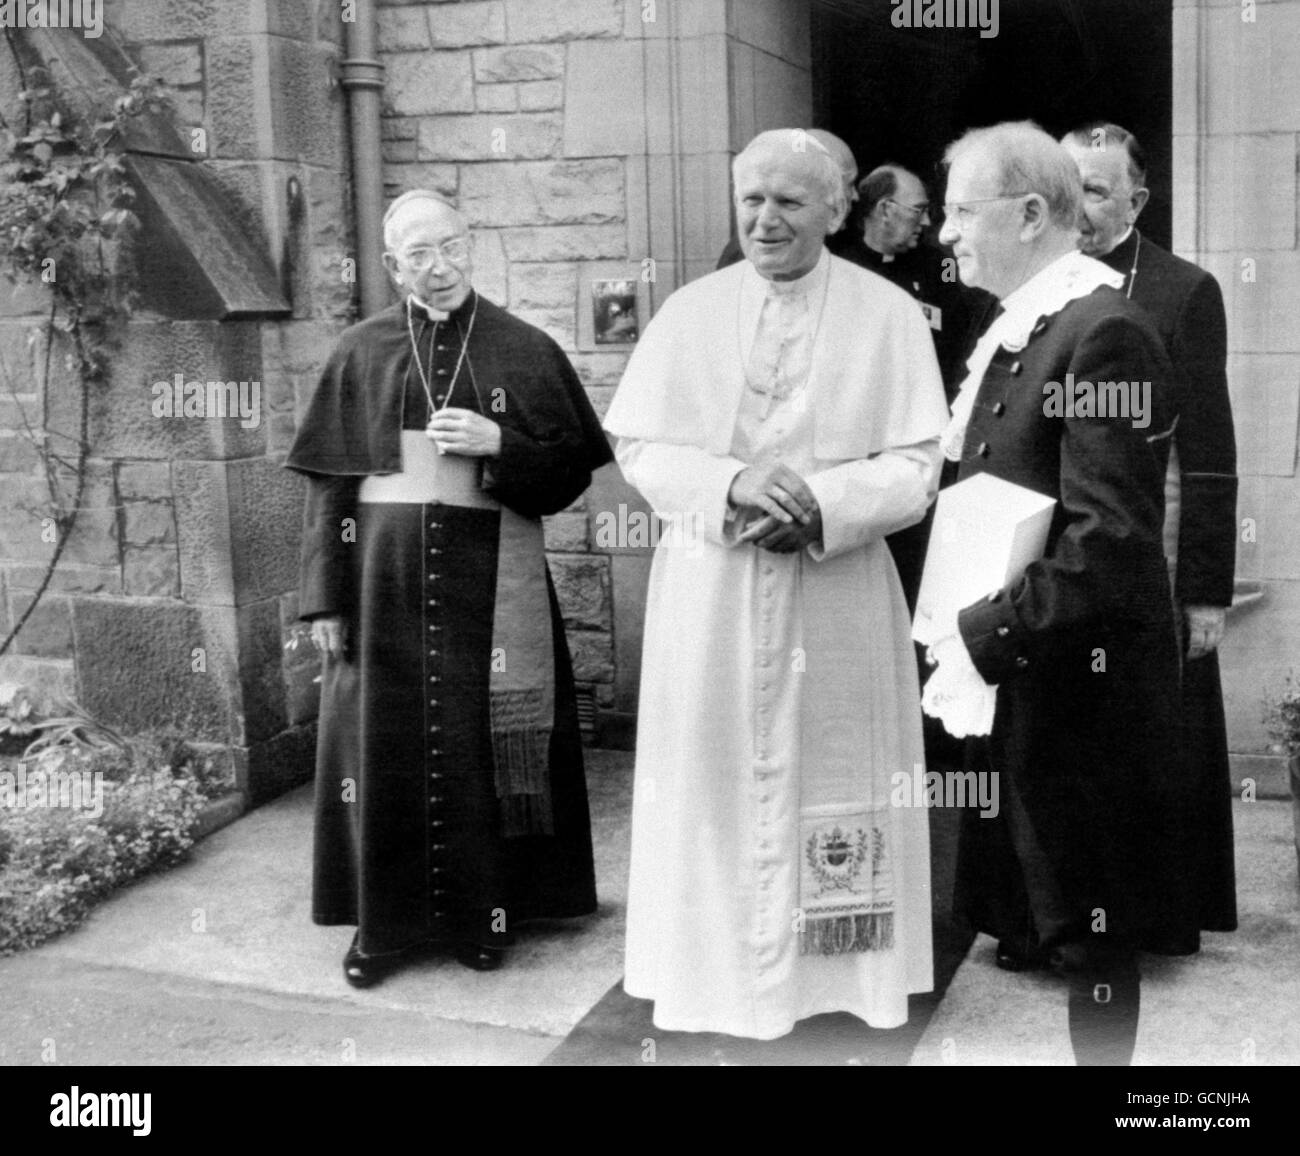 Pope John Paul II (centre) with the Moderator of the General Assembly of the Church of Scotland, the Right Reverend Professor John McIntyre (right) after their meeting at the Edinburgh home of the leader of Scotland's Roman Catholics, Cardinal Gray, this morning. Stock Photo